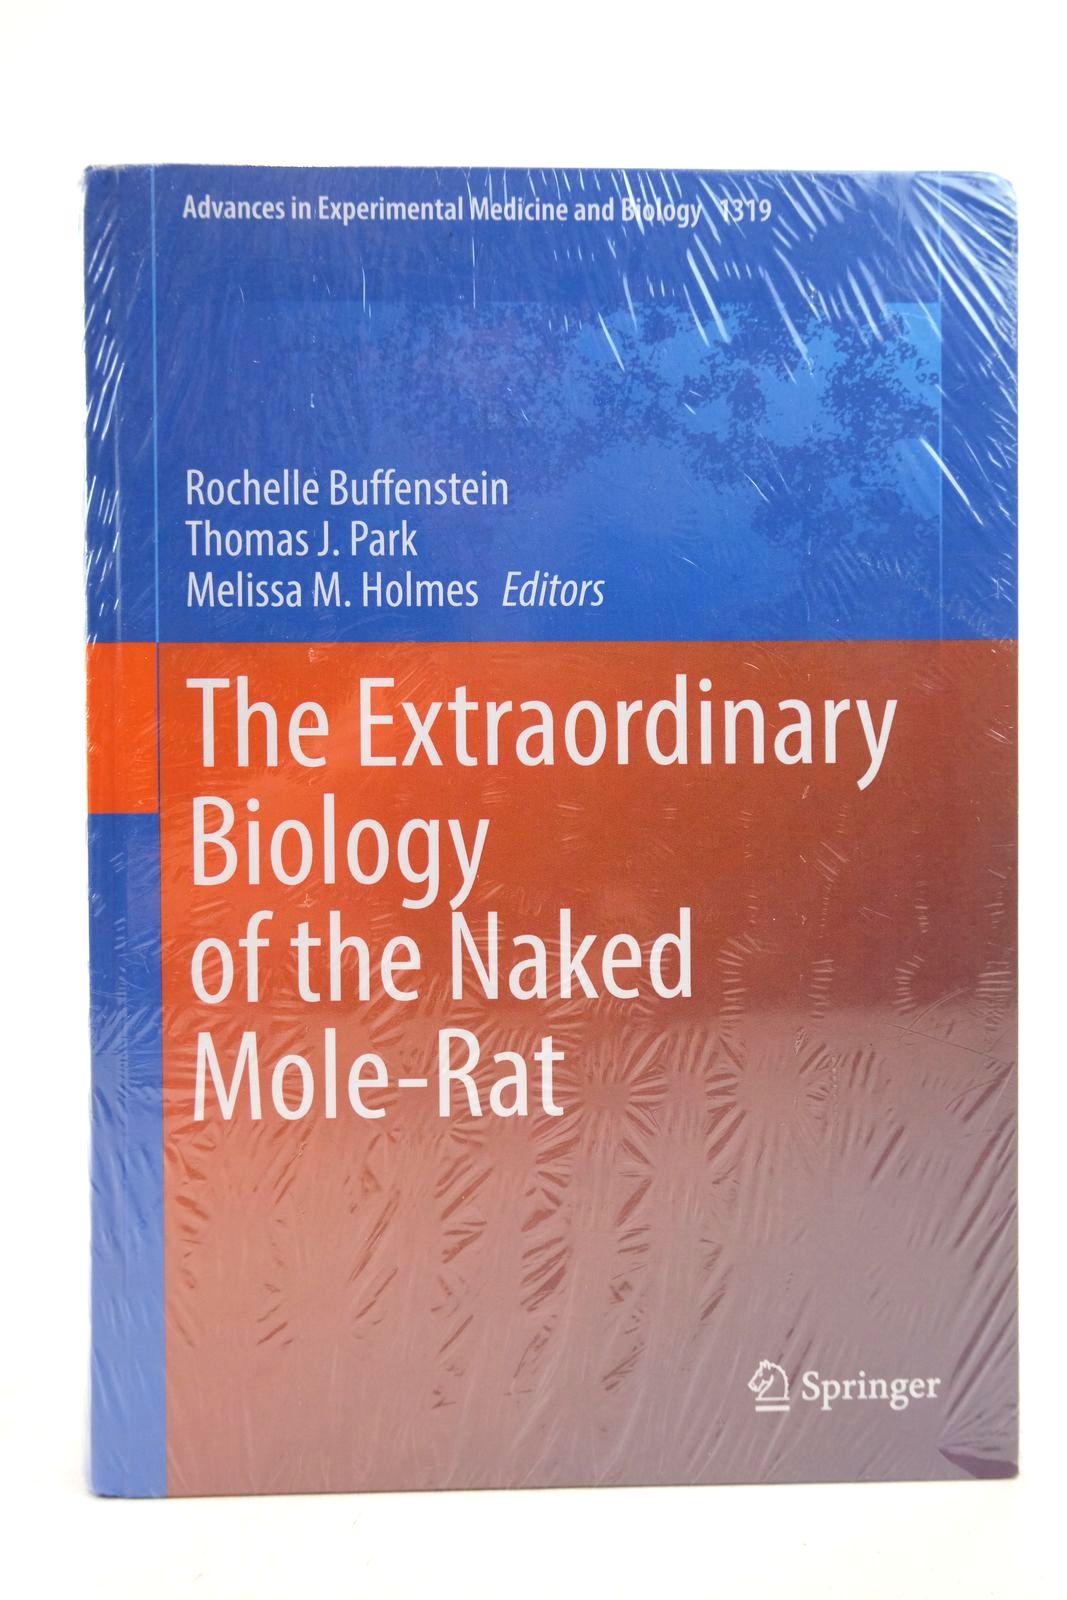 Photo of THE EXTRAORDINARY BIOLOGY OF THE NAKED MOLE-RAT written by Buffenstein, Rochelle
Park, Thomas J.
Holmes, Melissa M. published by Springer (STOCK CODE: 2140381)  for sale by Stella & Rose's Books